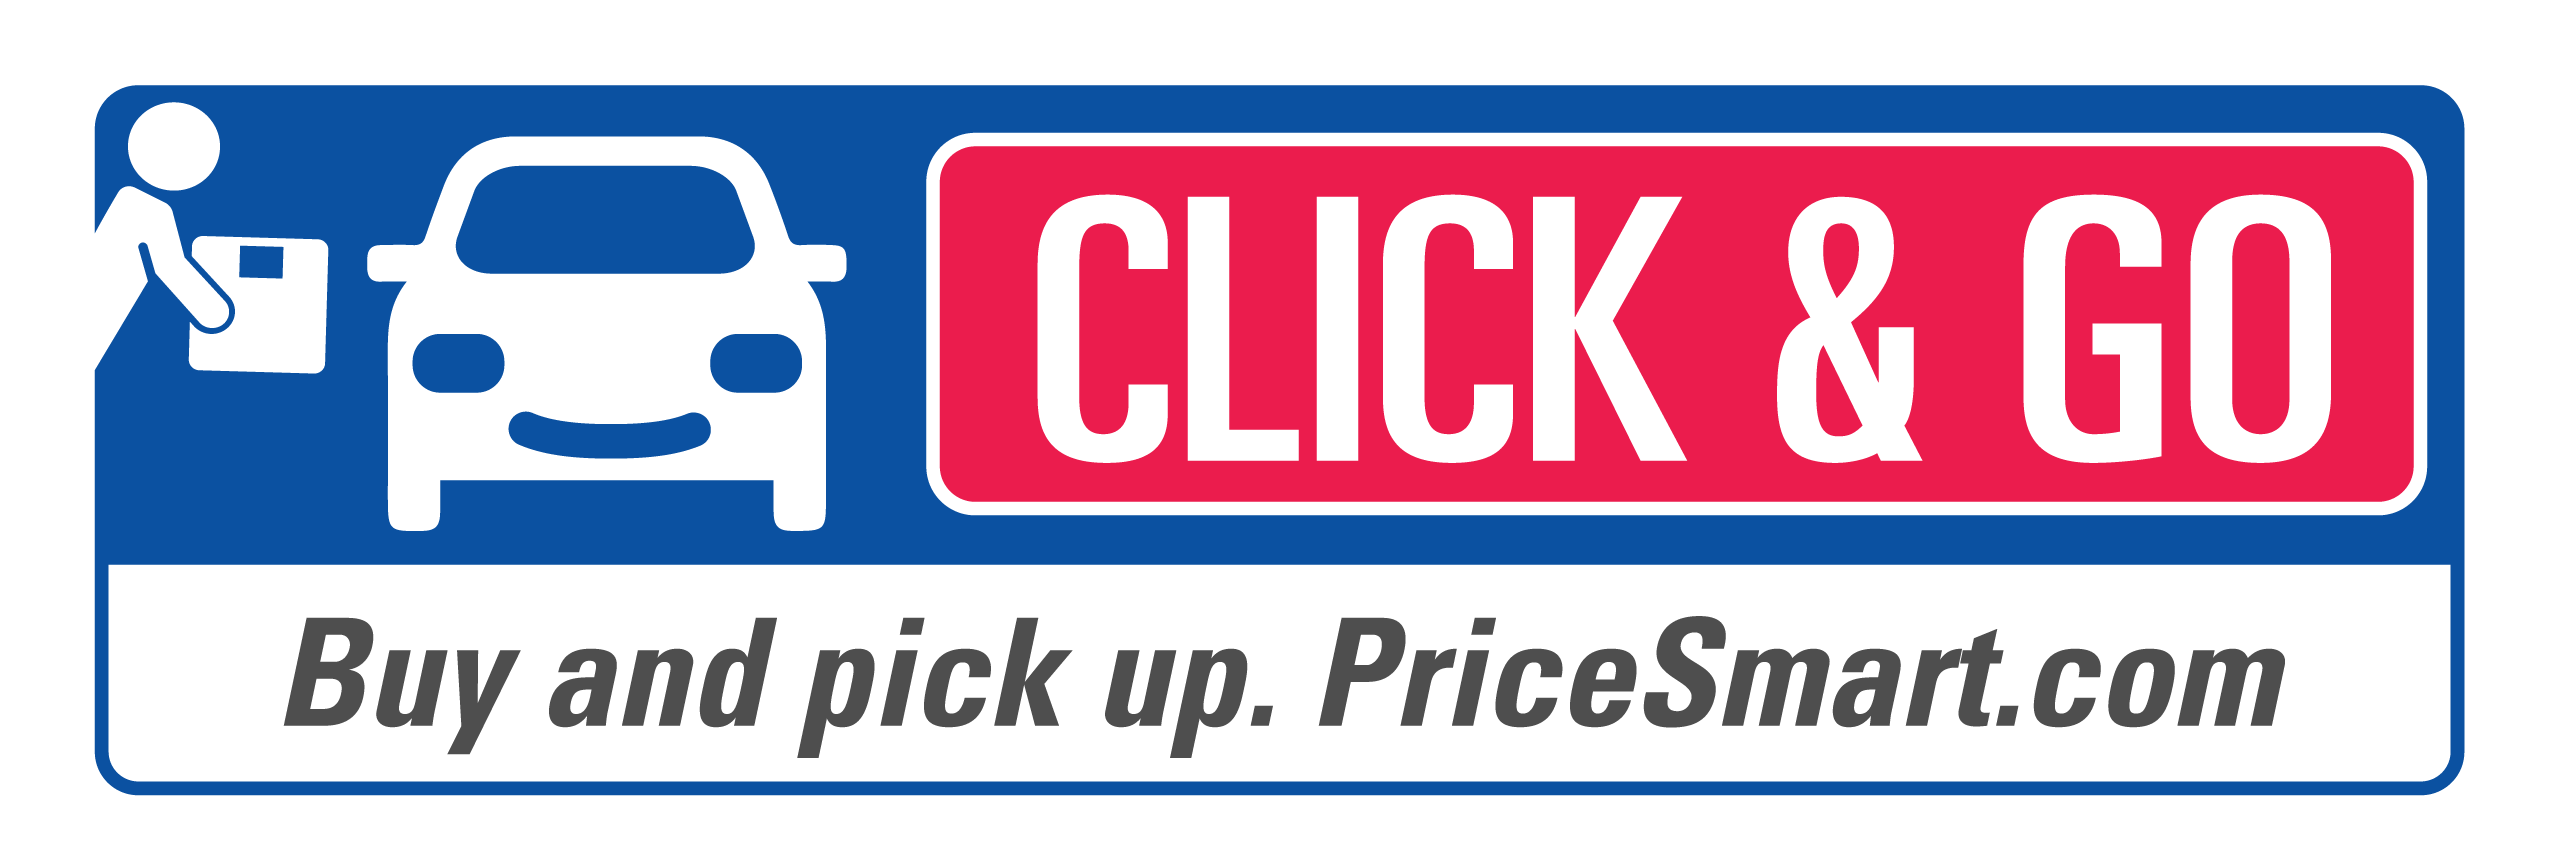 Shop Online with Click N Go